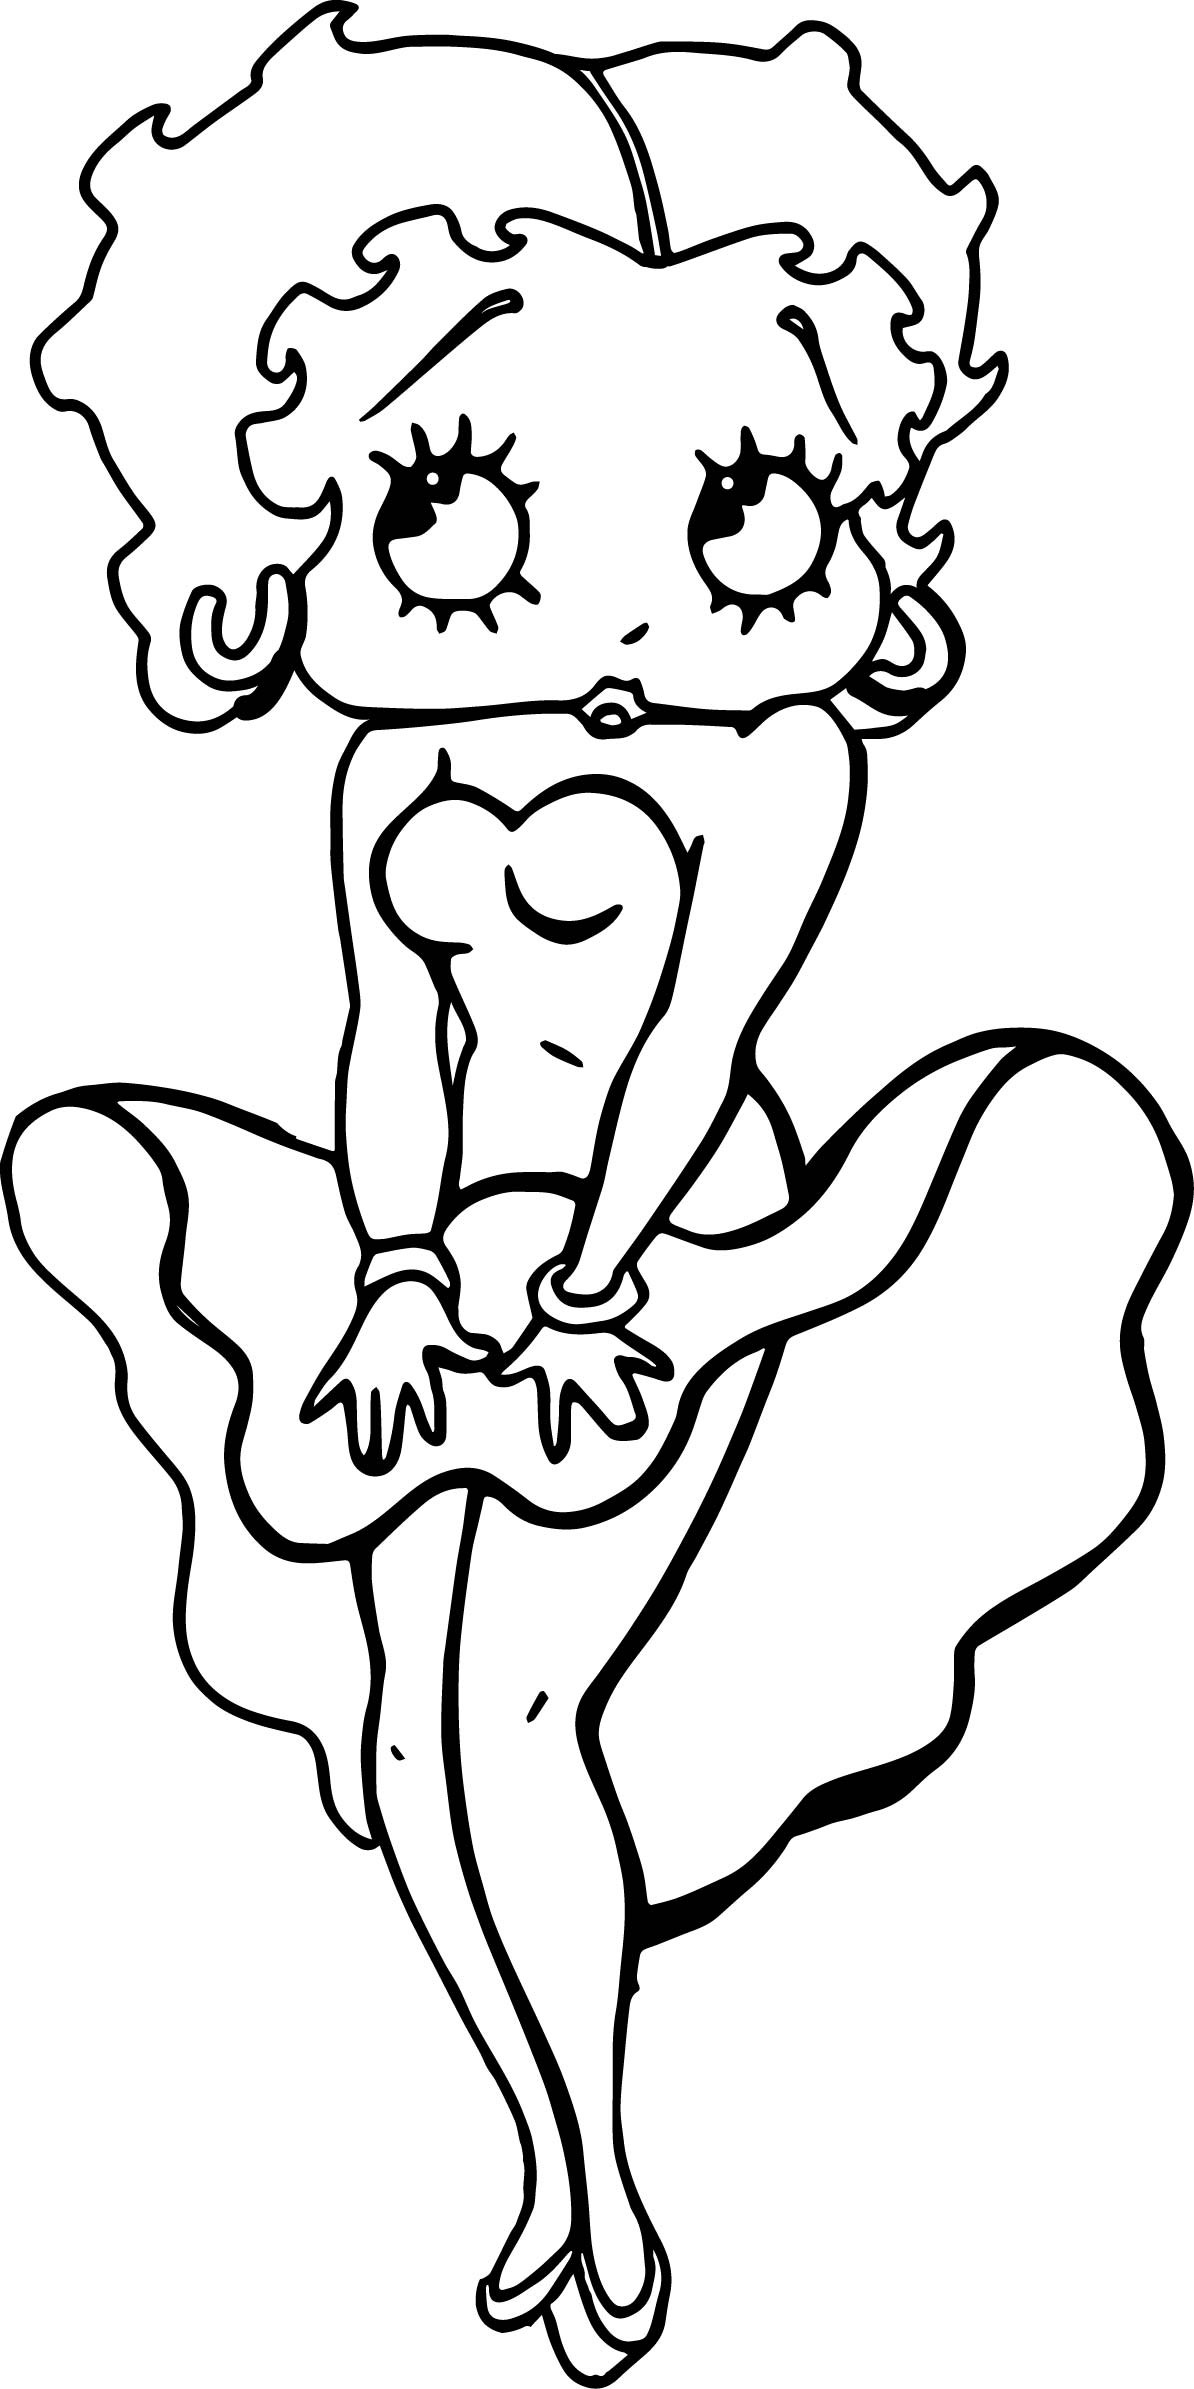 Betty Boop Coloring Pages at GetColorings.com | Free printable ...